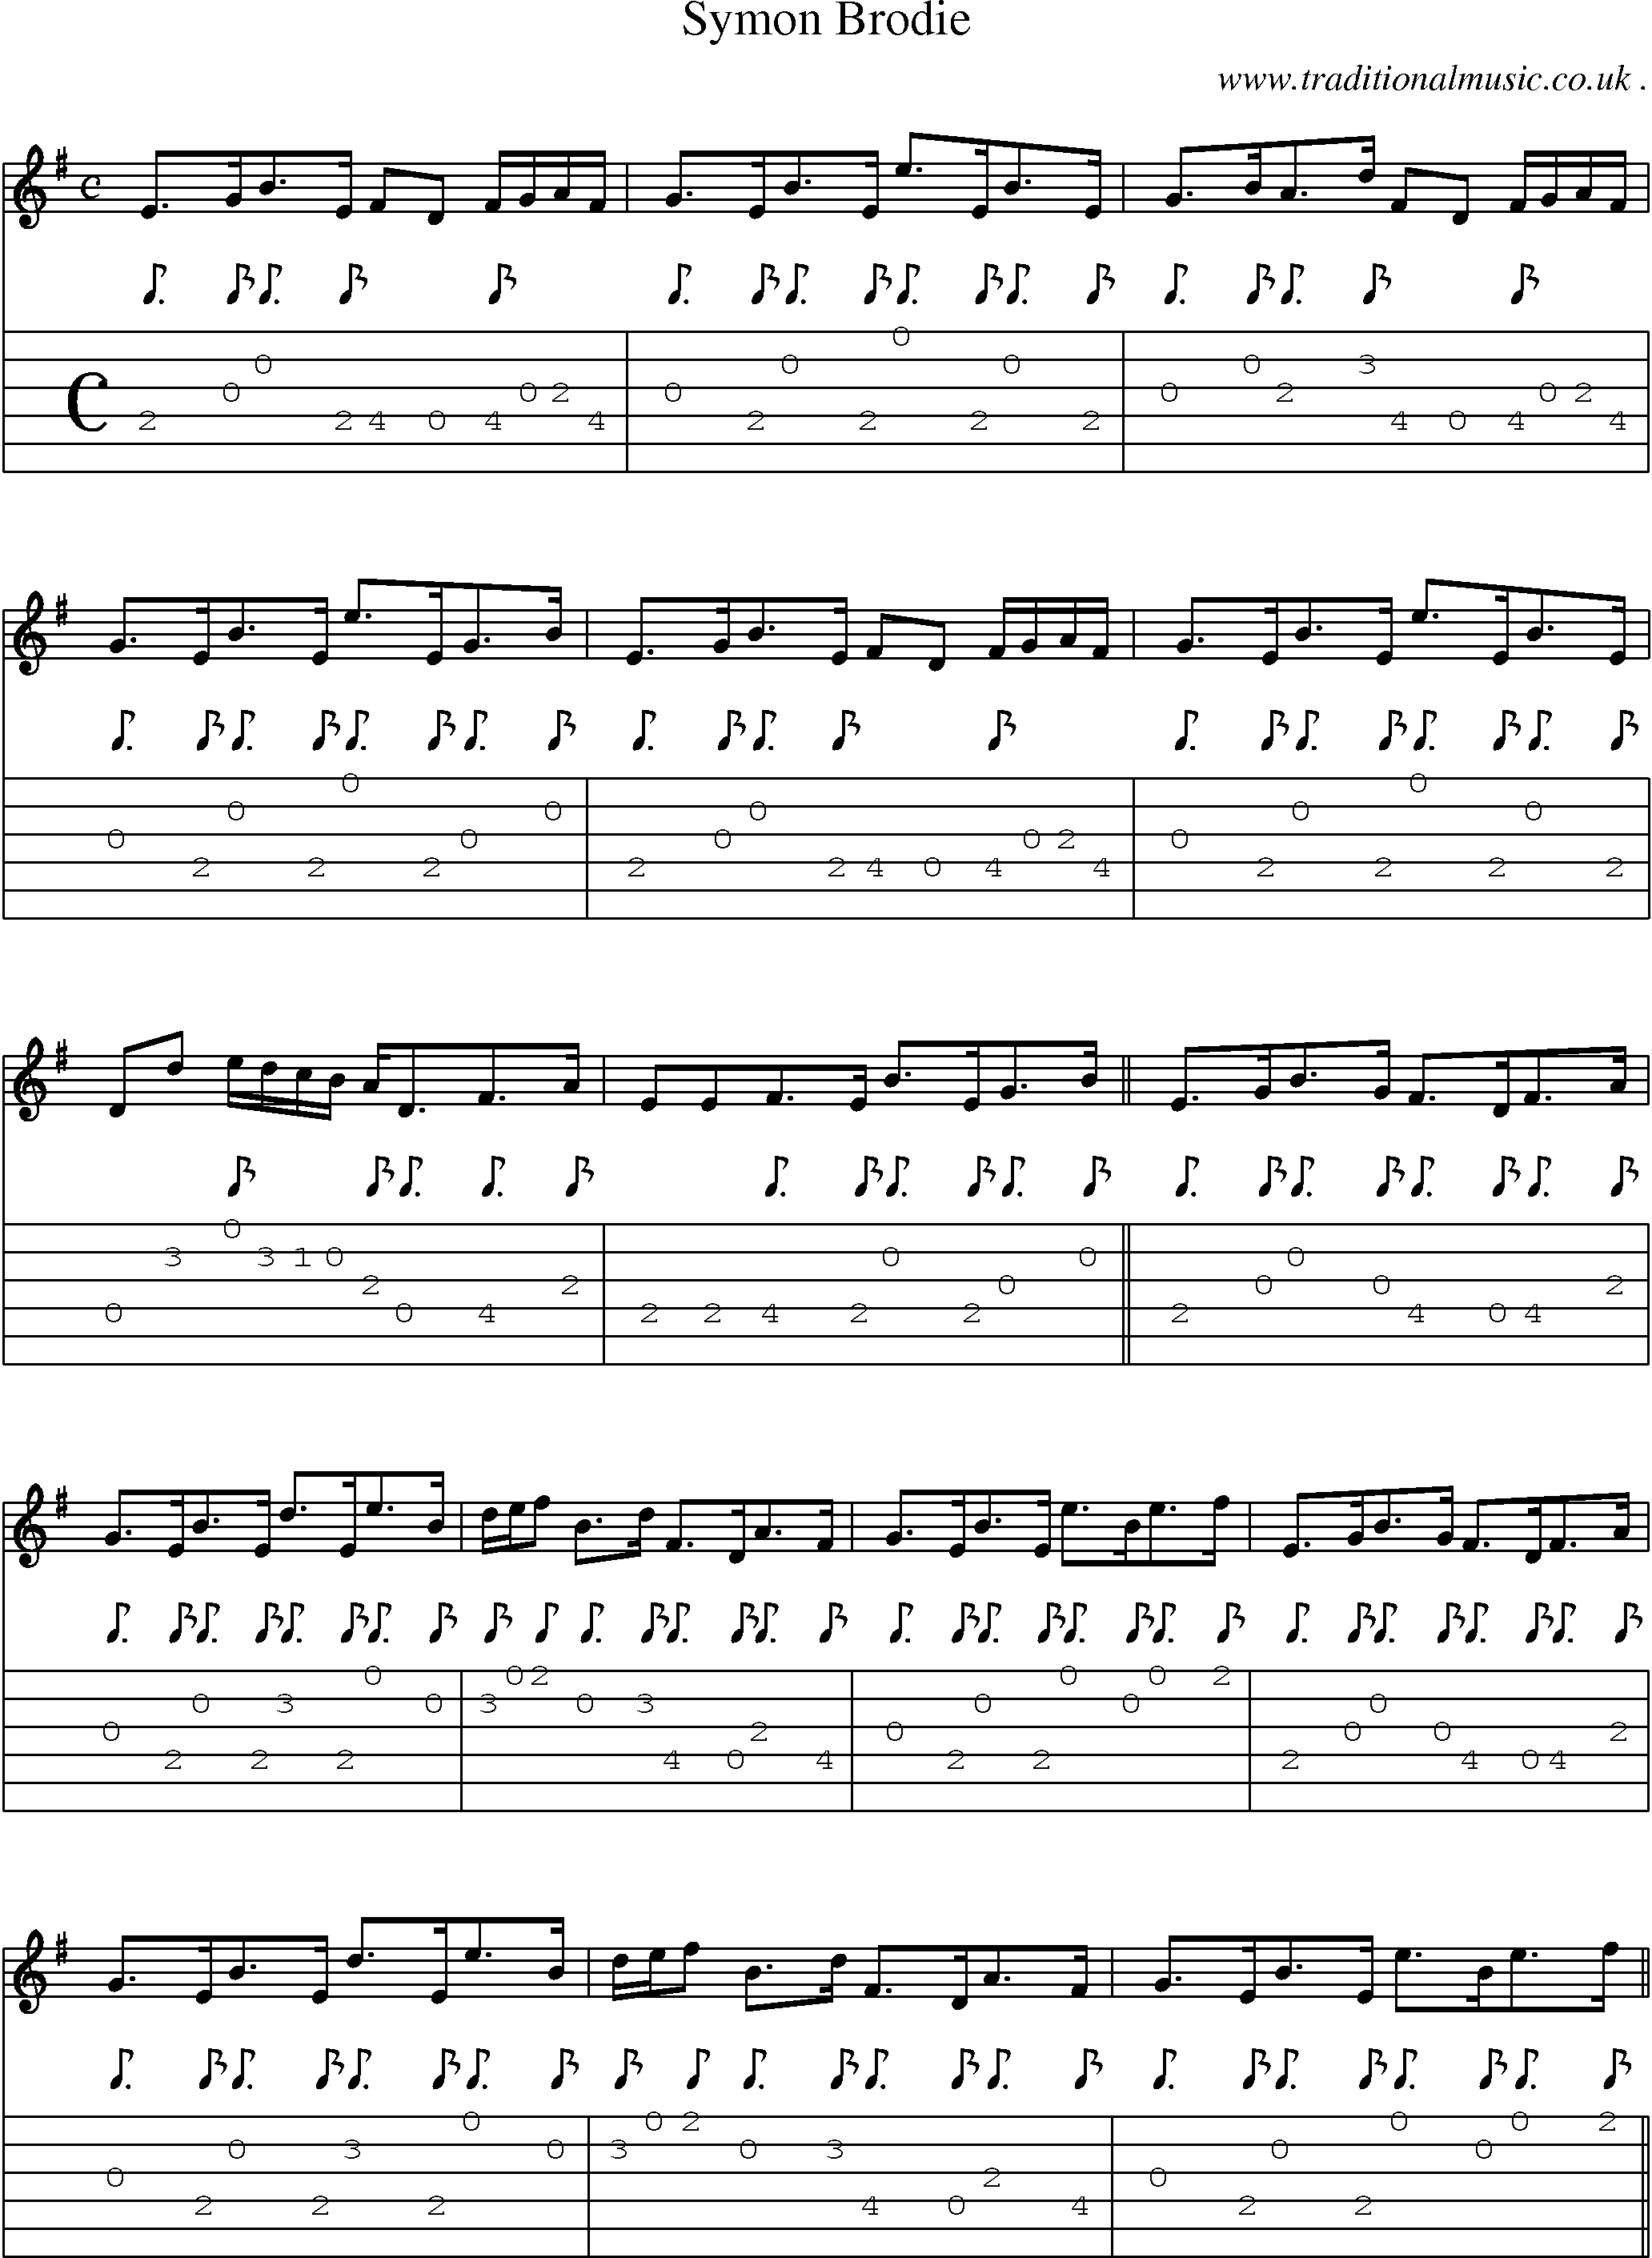 Sheet-music  score, Chords and Guitar Tabs for Symon Brodie